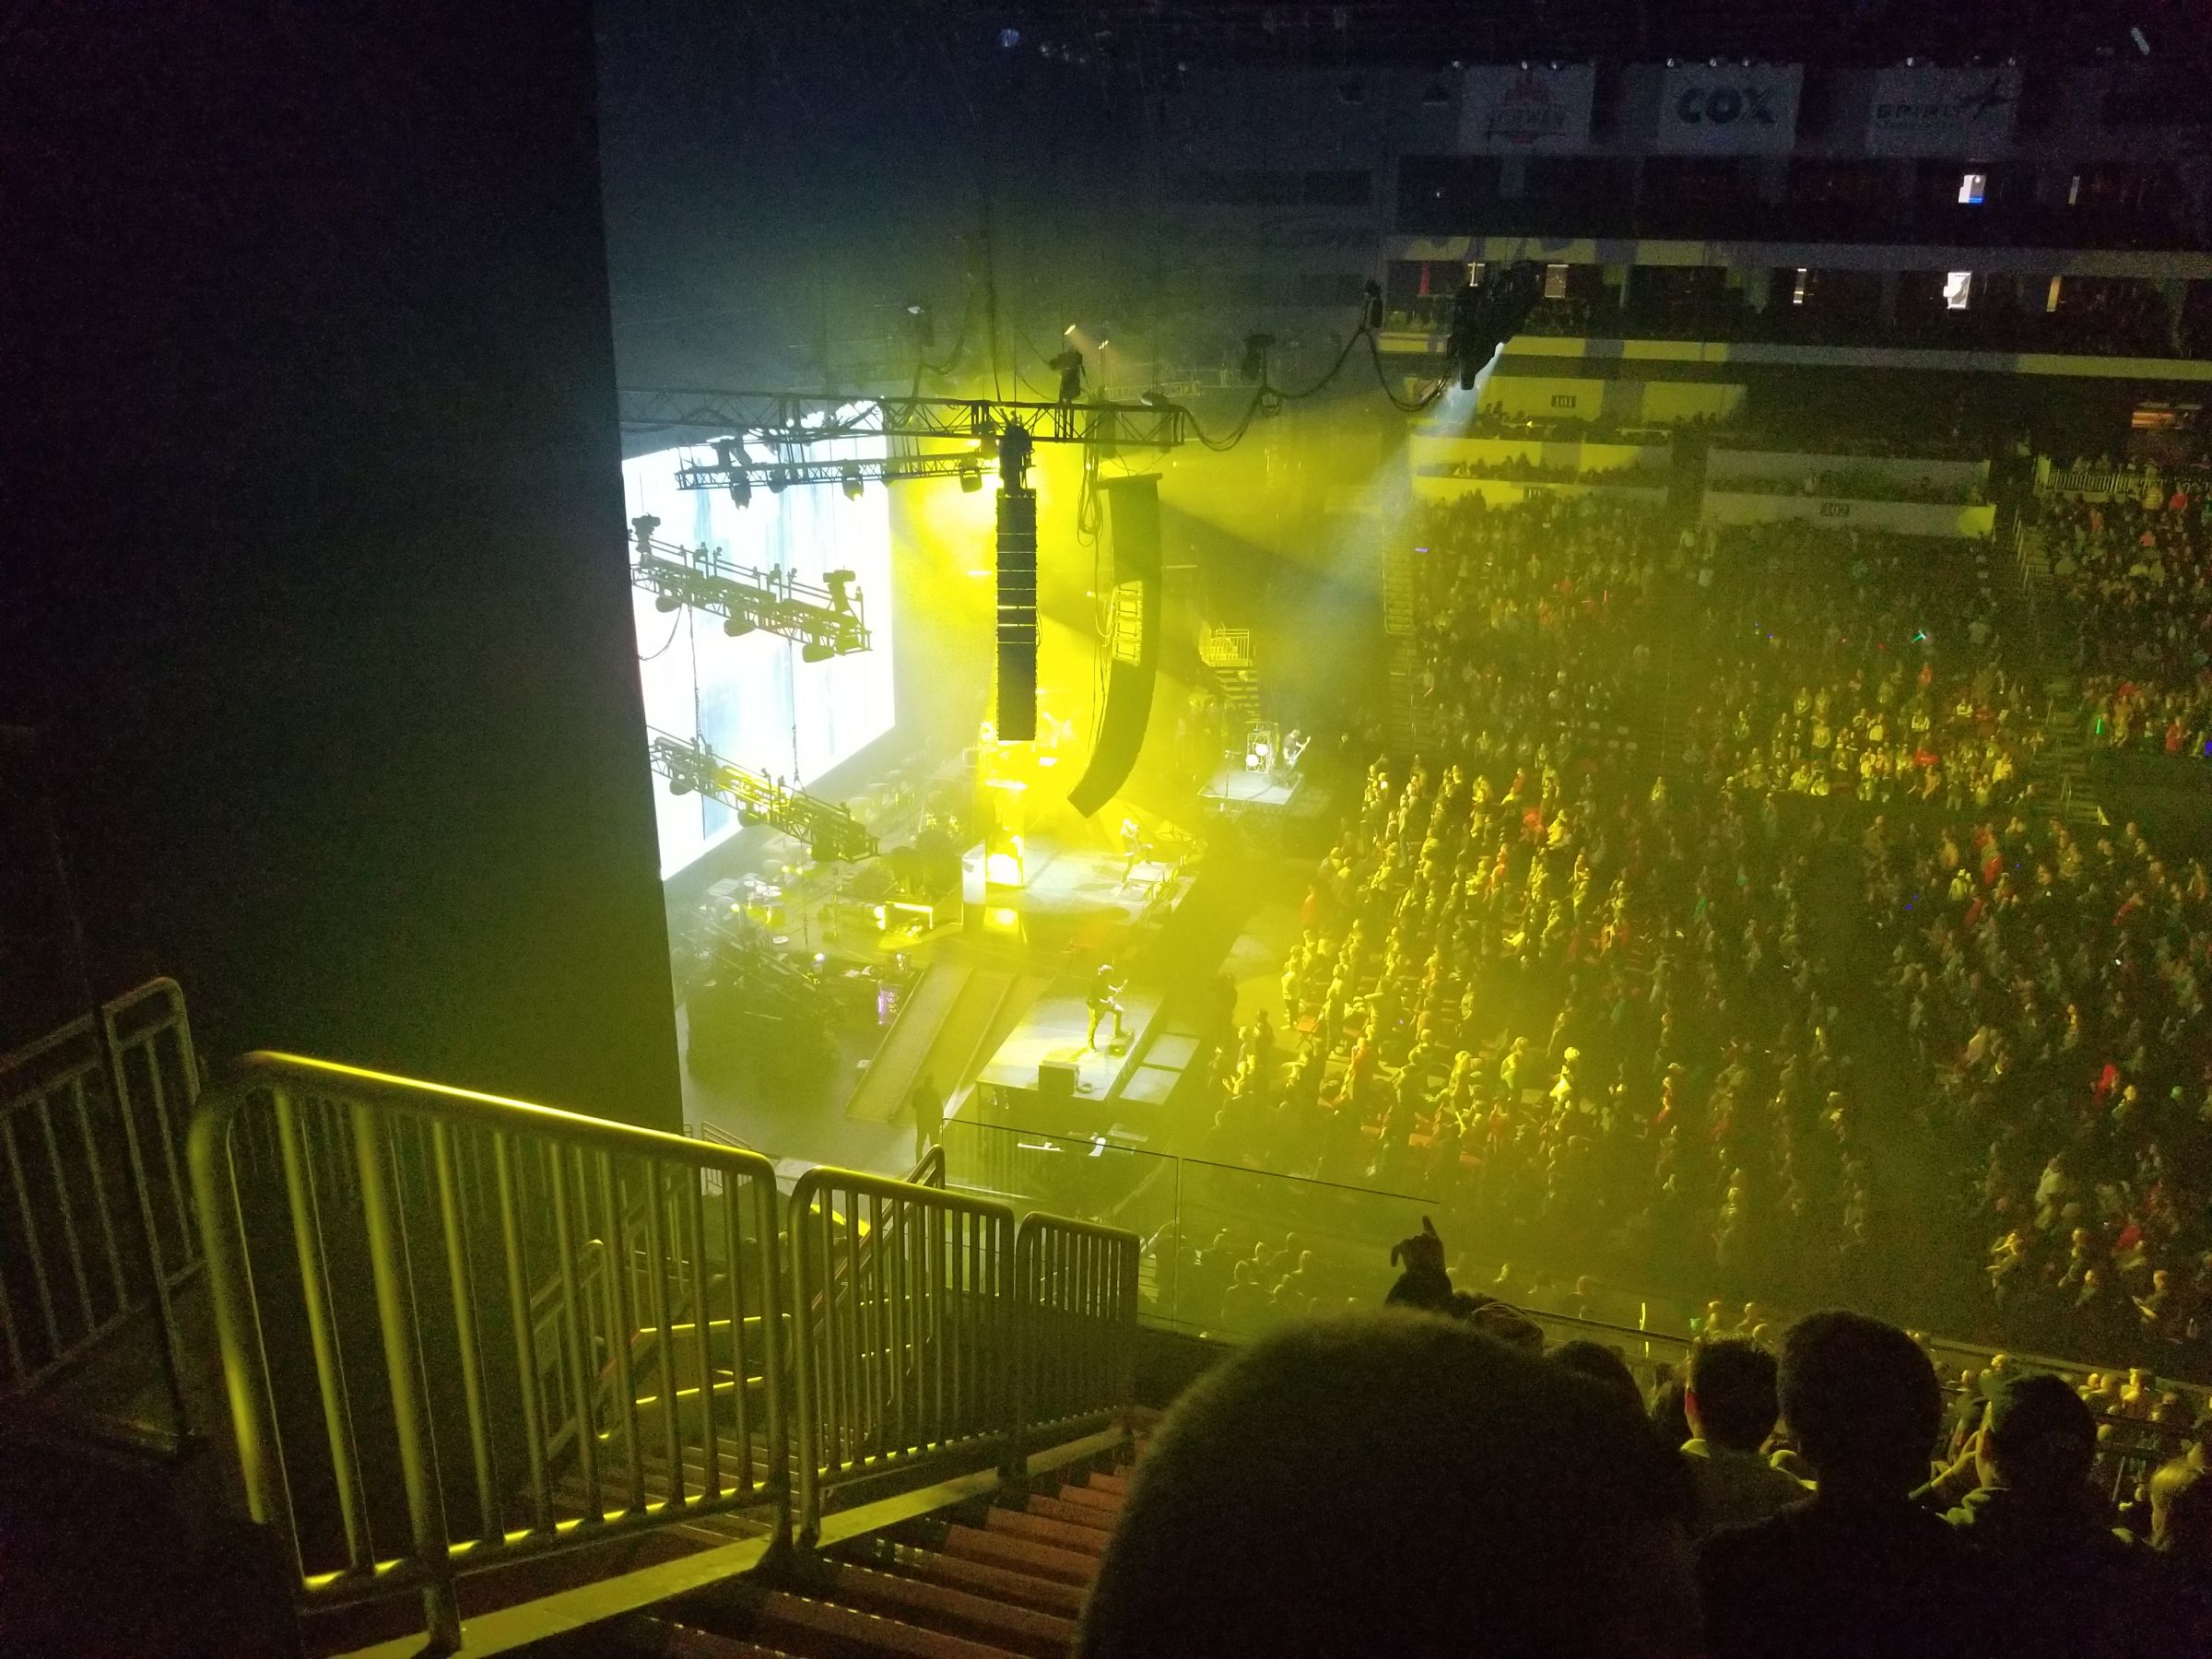 section 217, row k seat view  for concert - intrust bank arena